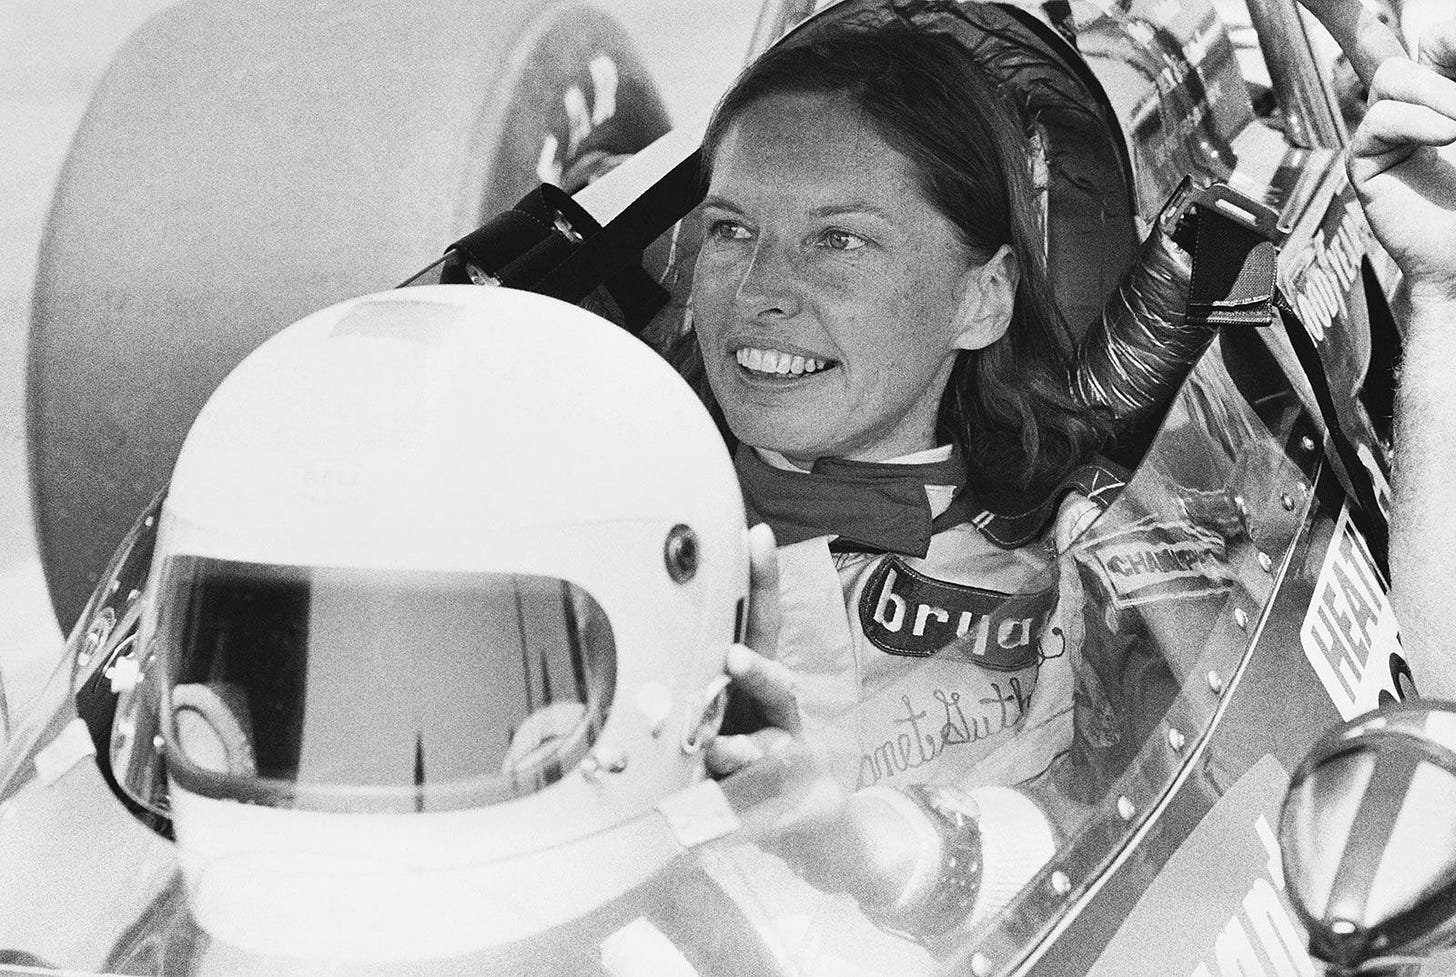 Janet Guthrie | Biography, Indy 500, & Facts | Britannica